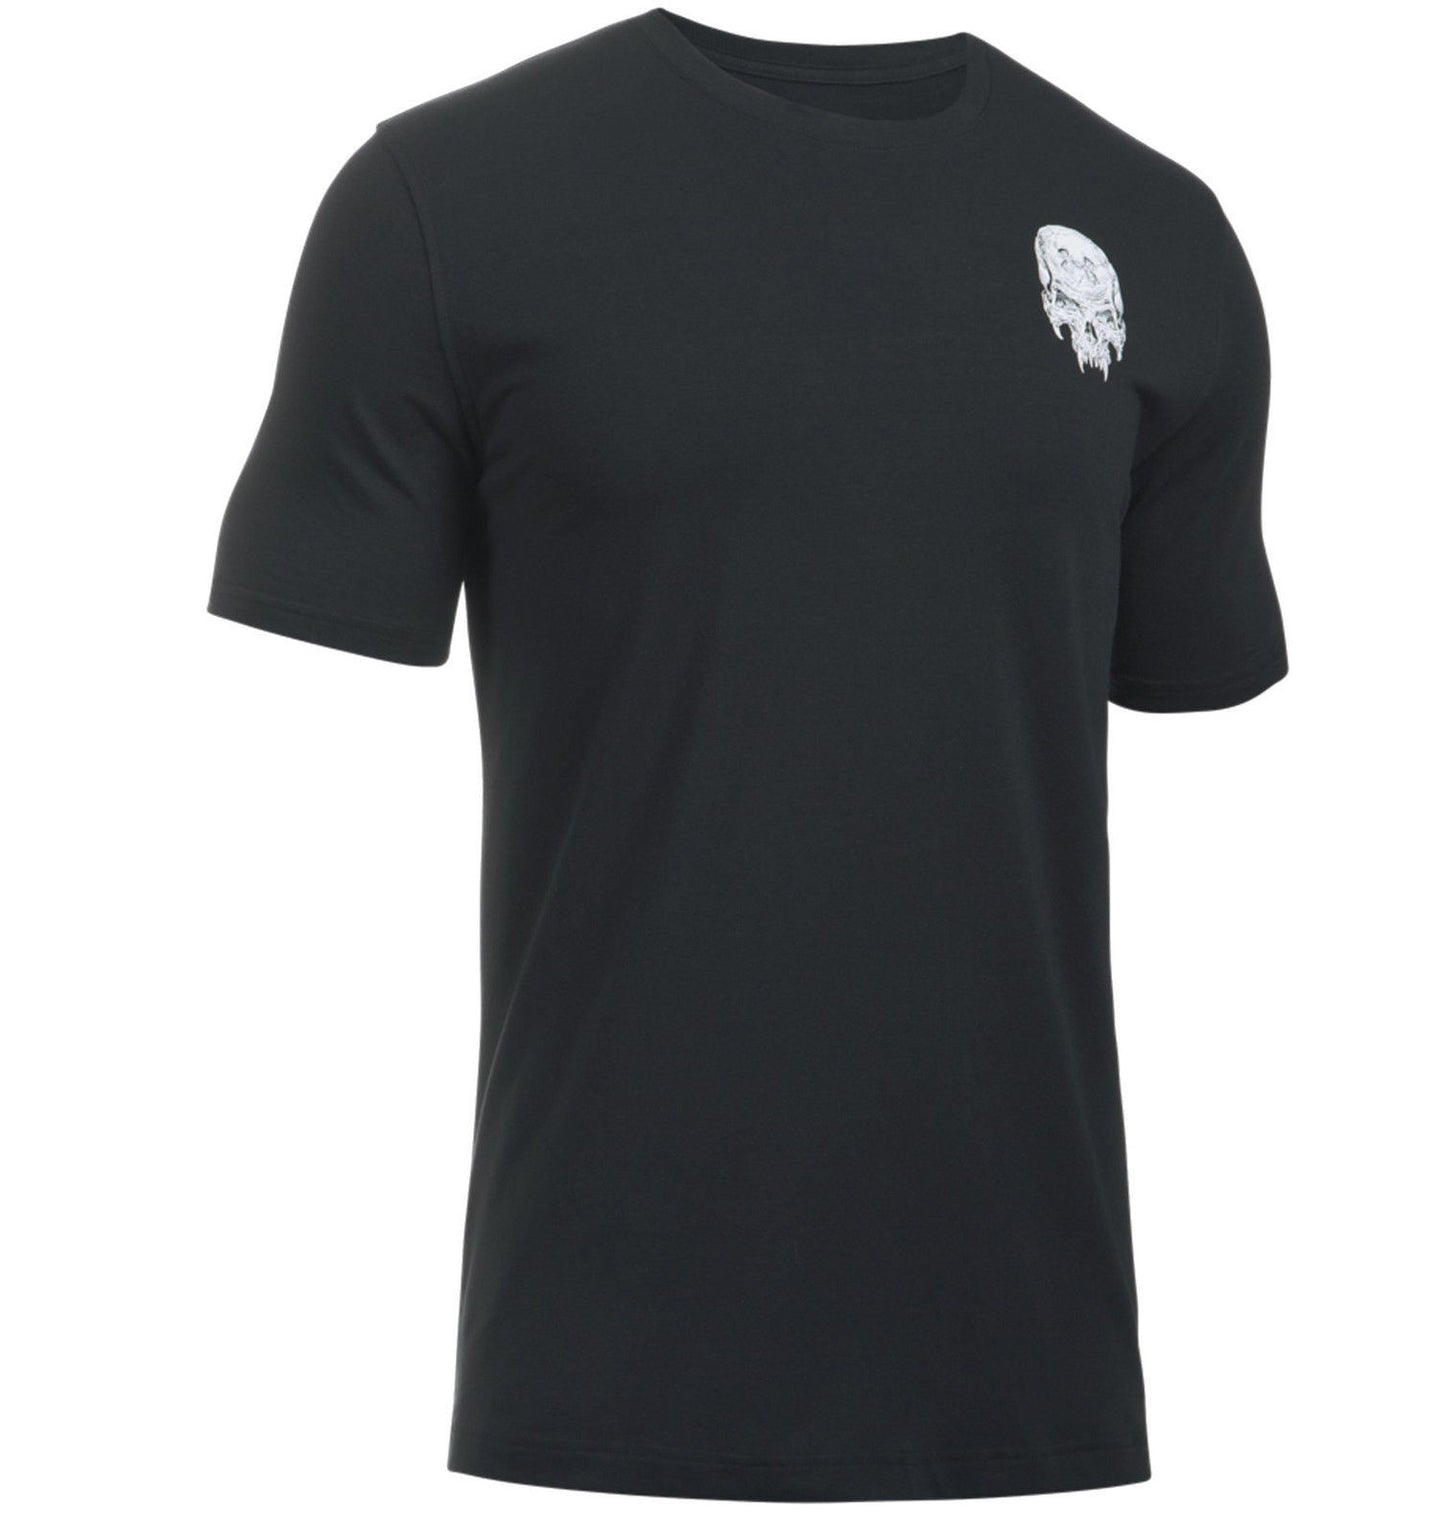 Under Armour Freedom Jack T-Shirt - UA Men's Black Tactical Charged Cotton Tee